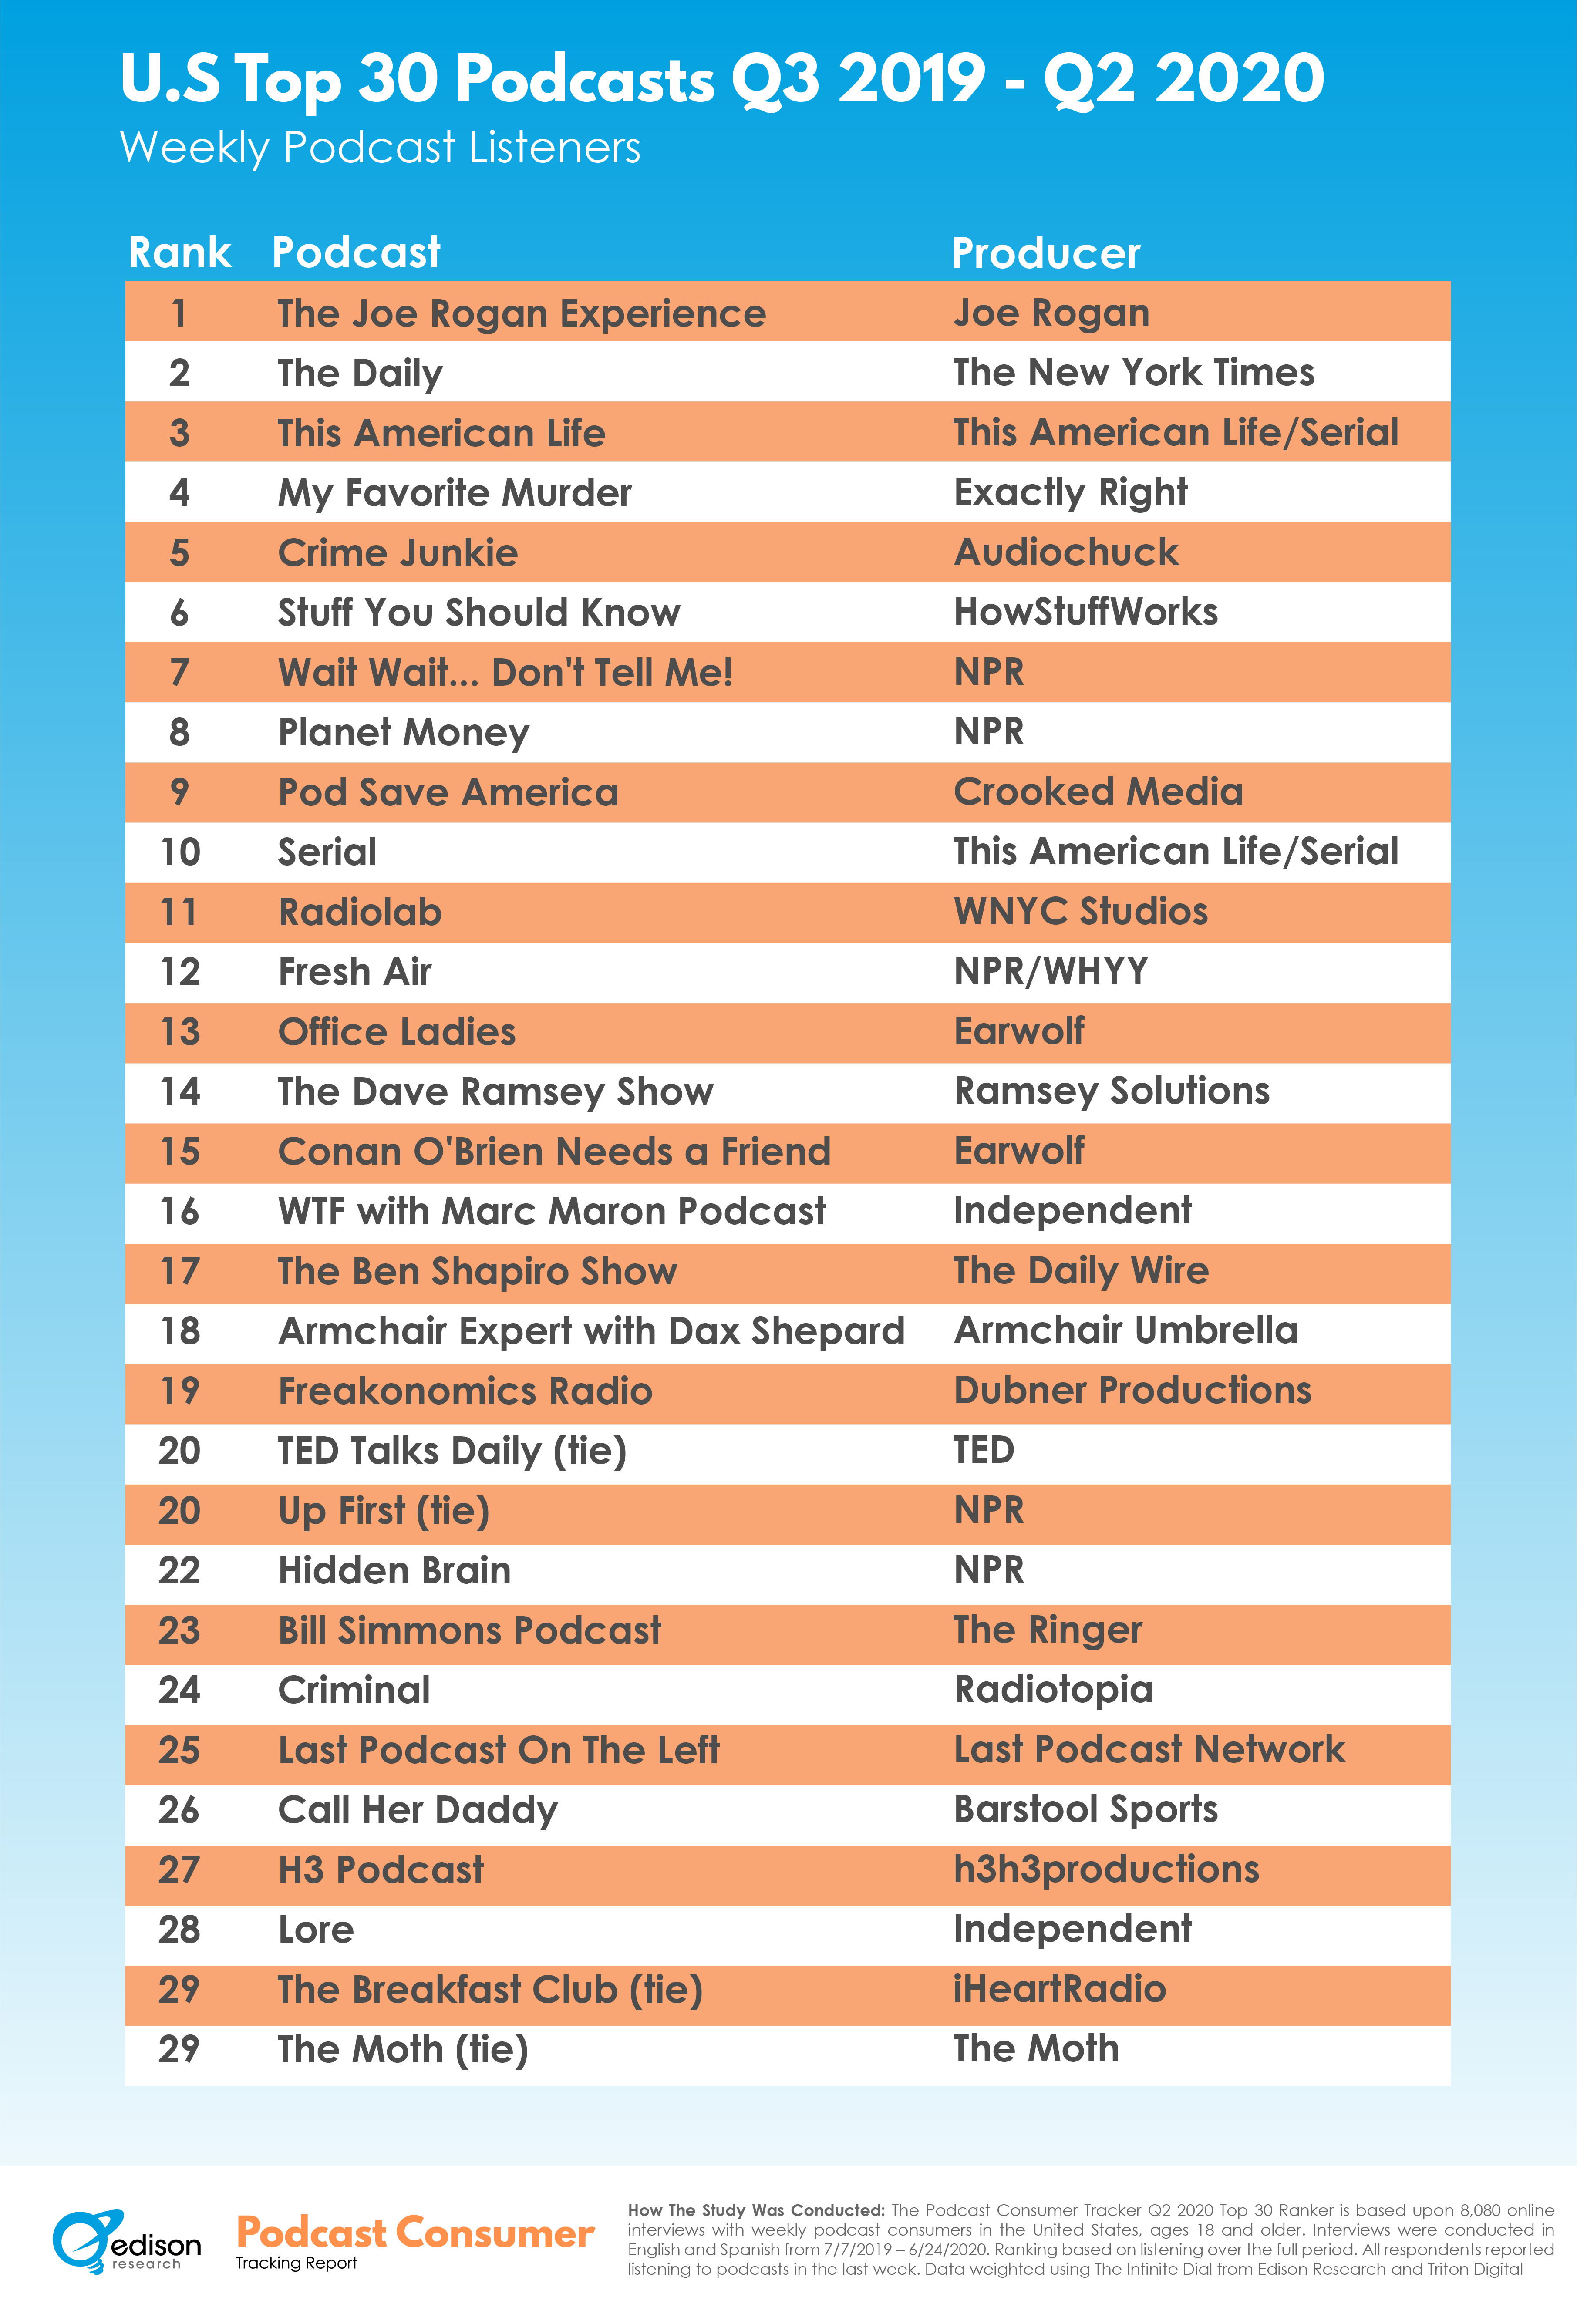 egyptisk Fortære pedal The Top 30 U.S. Podcasts According to the Podcast Consumer Tracker - Edison  Research